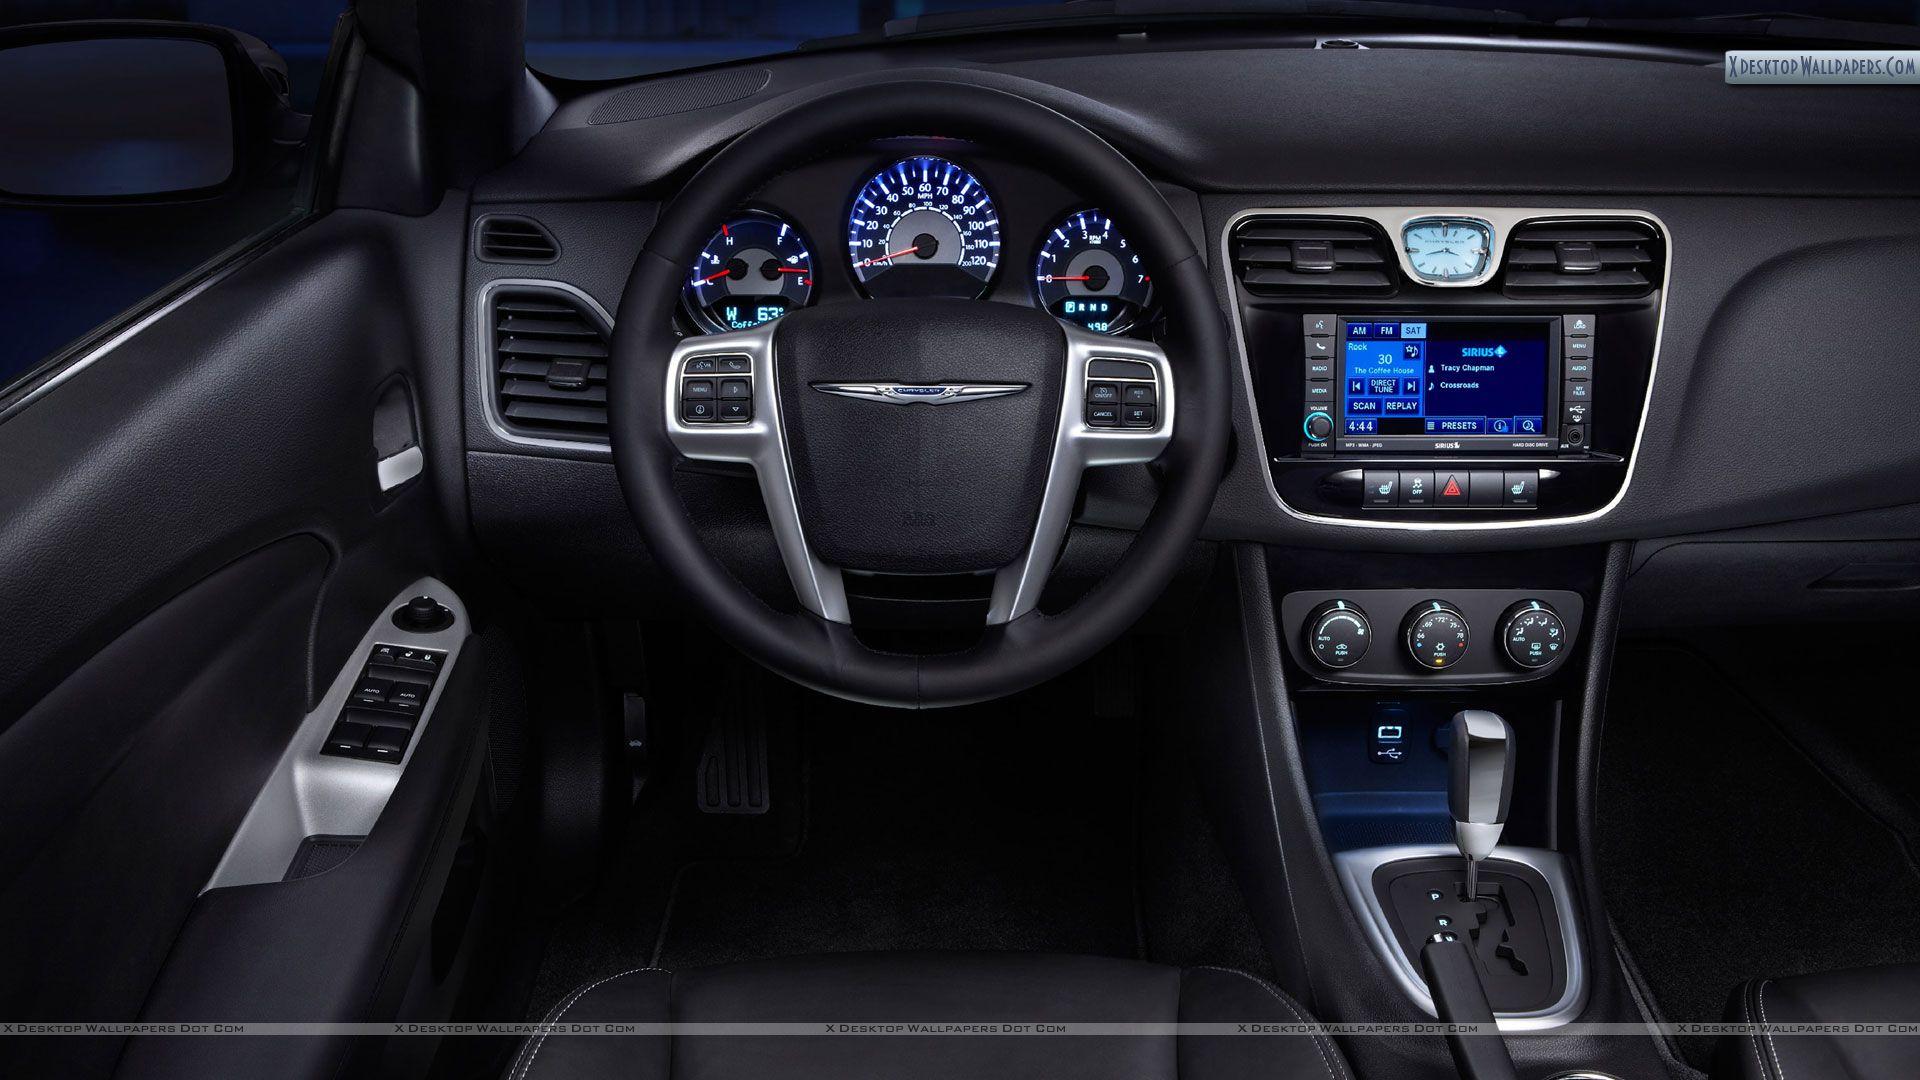 Chrysler 200 Wallpapers, Photos & Image in HD